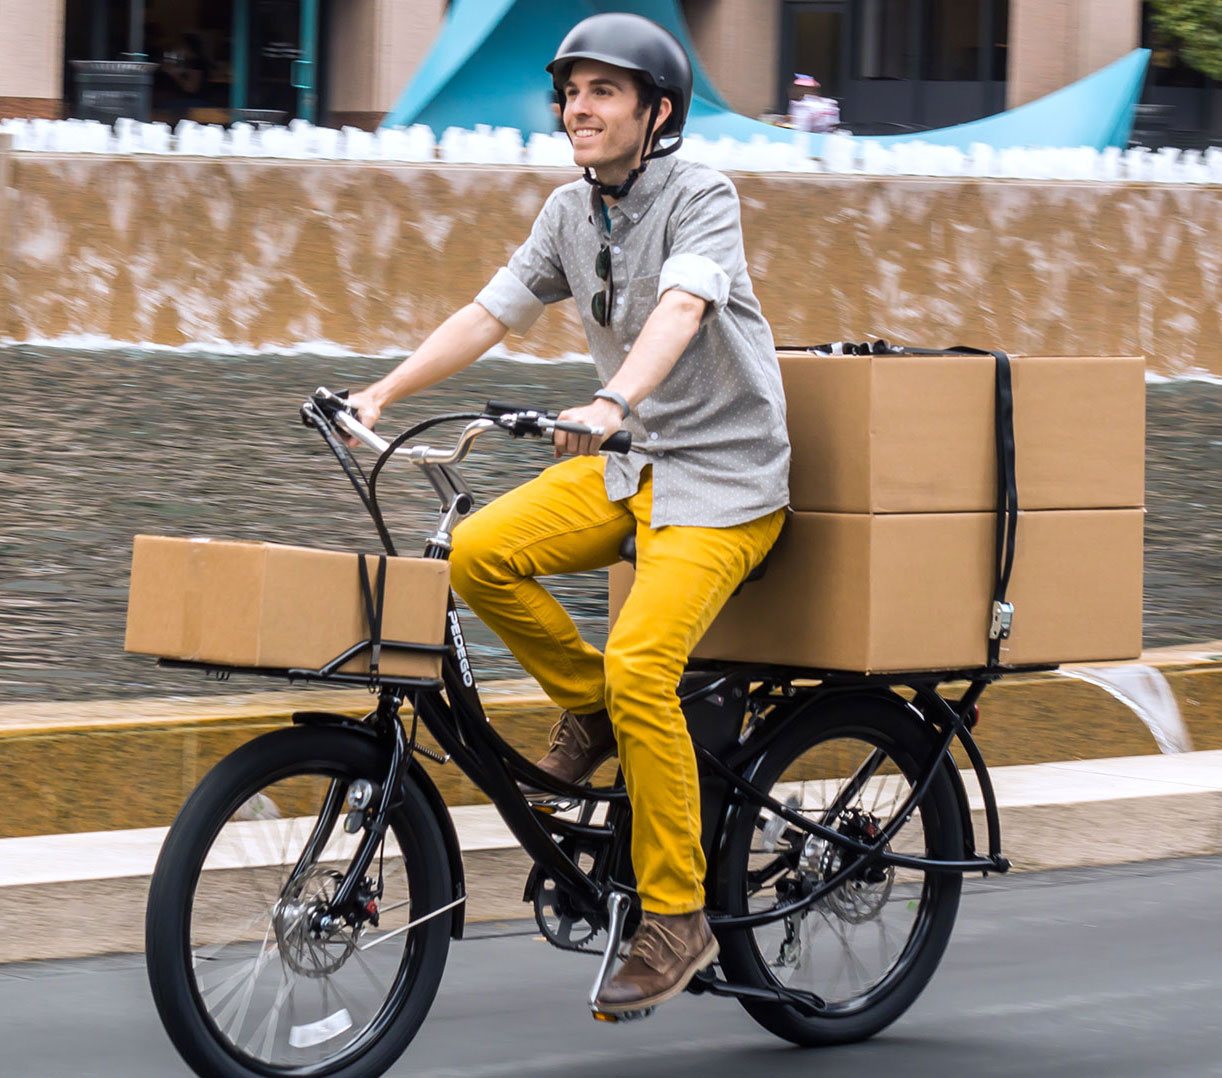 guy using electric bike to carry cargo